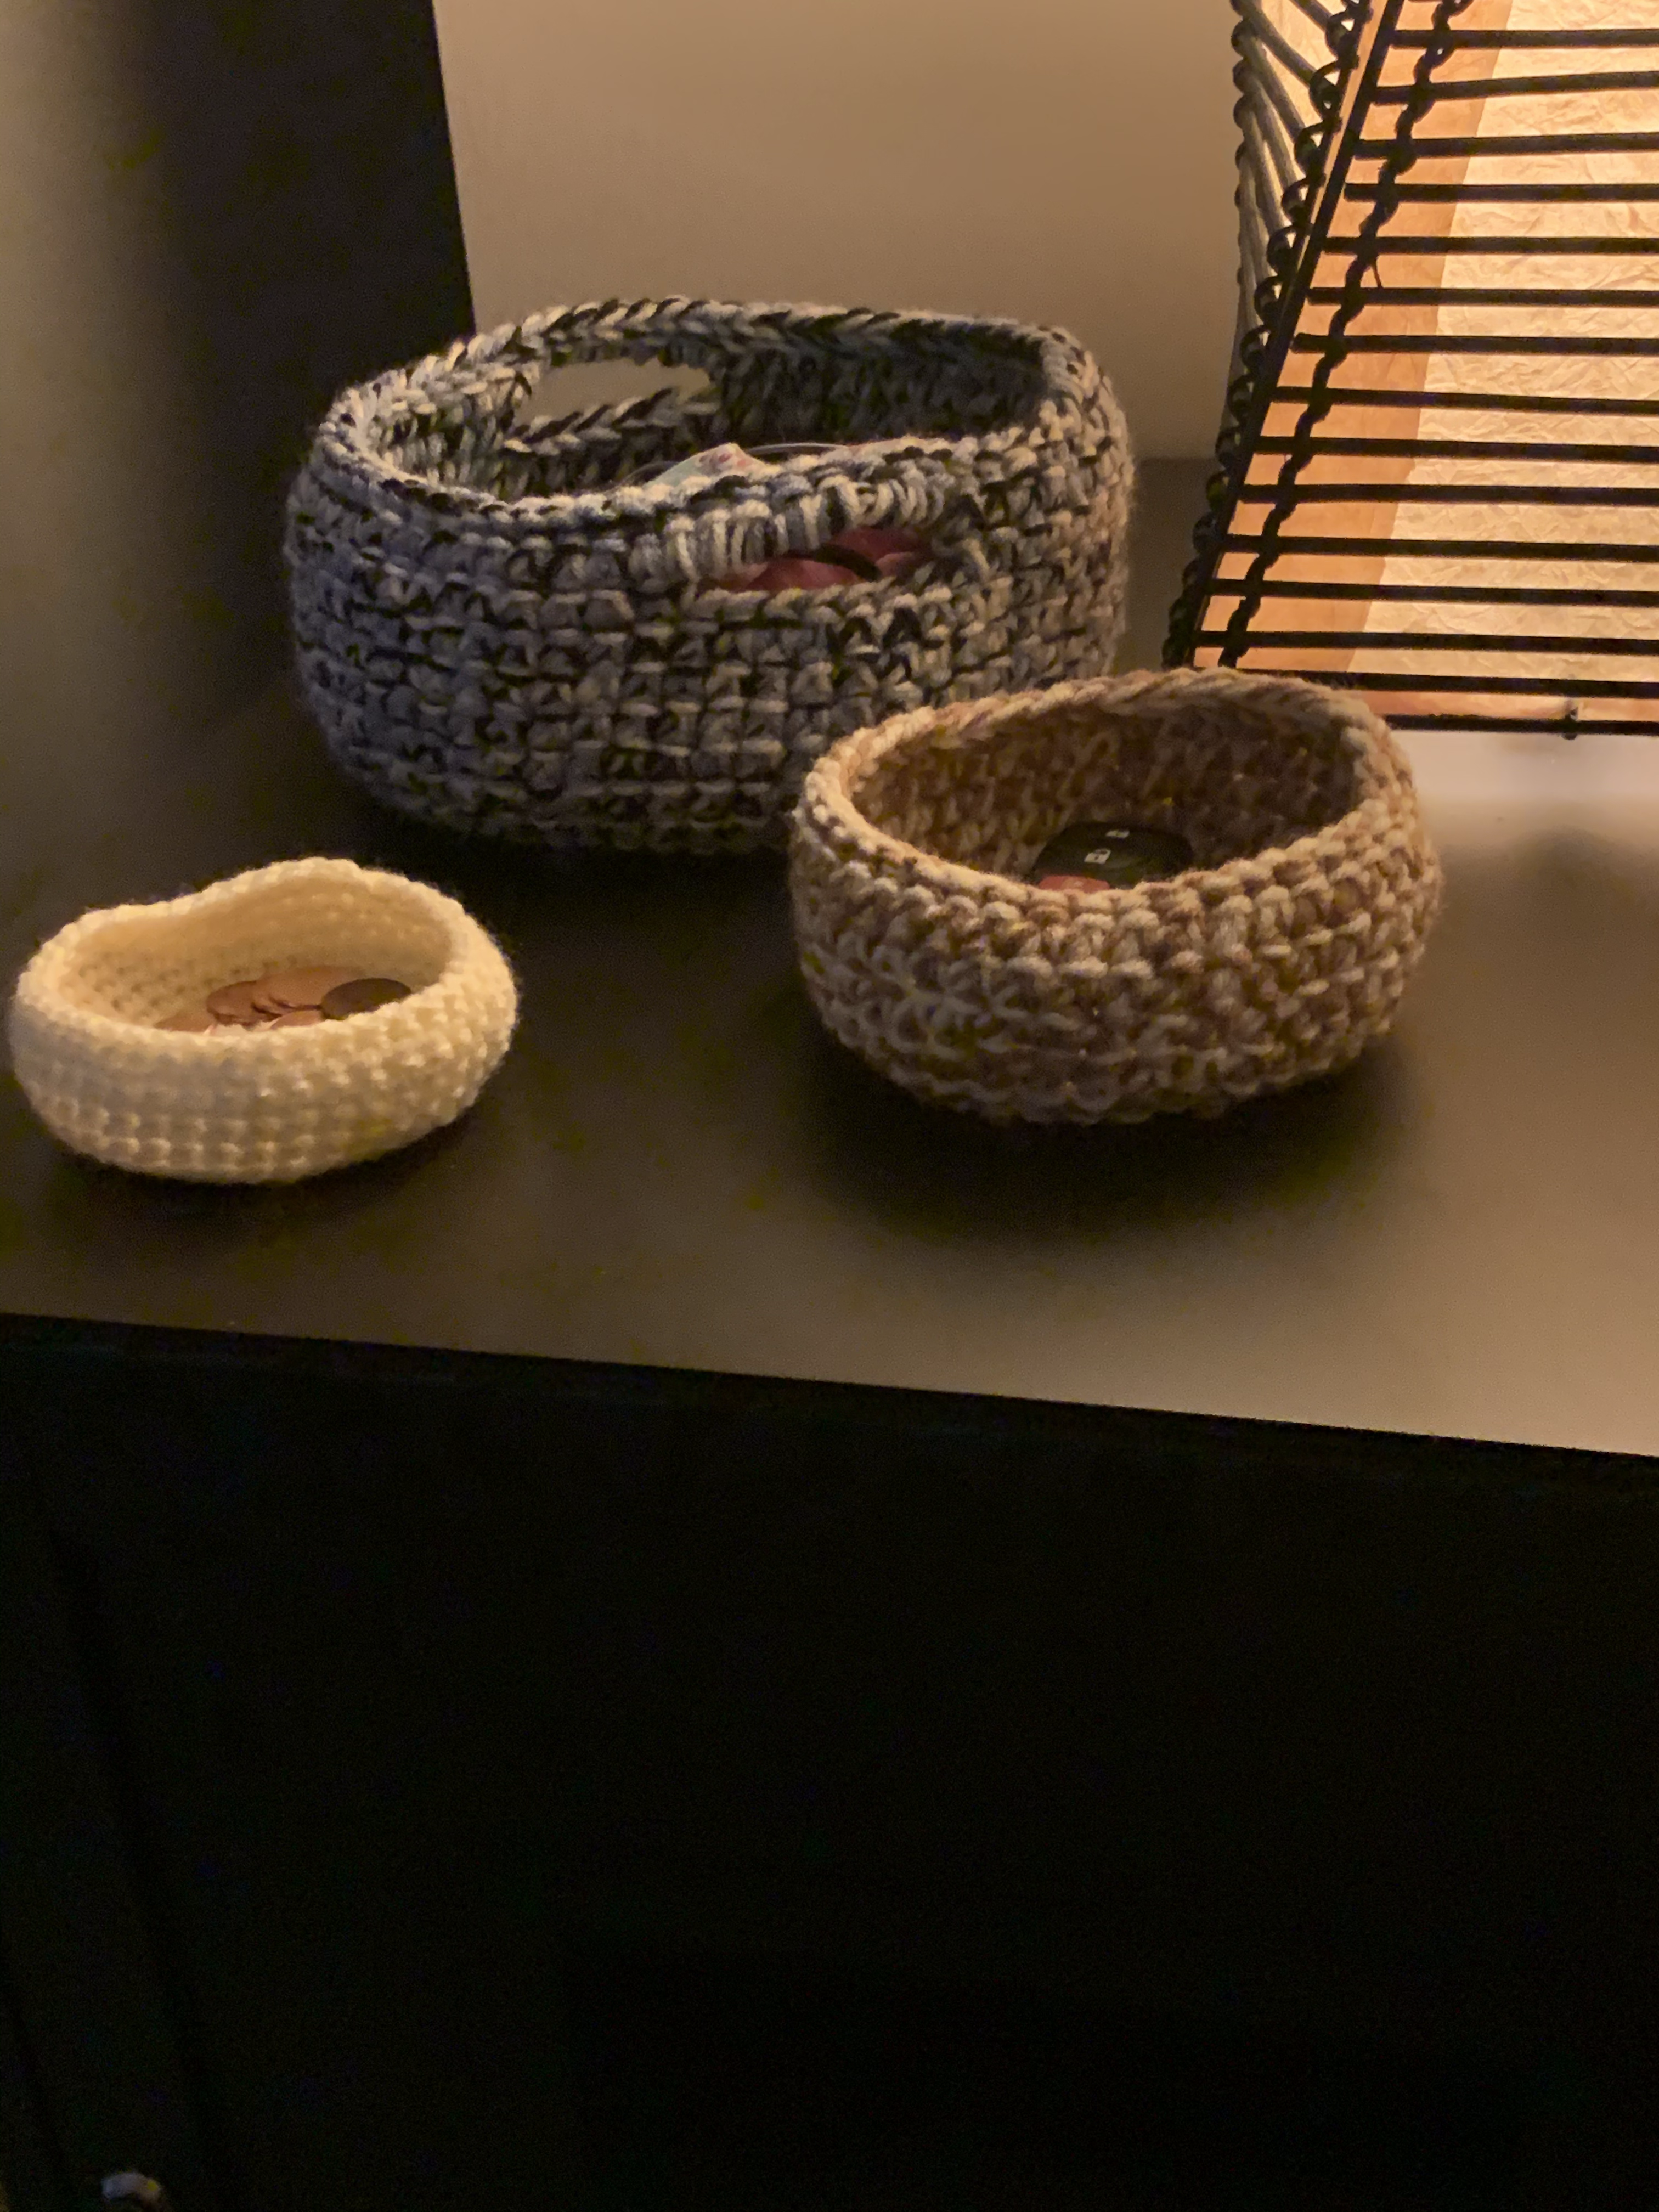 3 small, crocheted baskets, viewed from the side